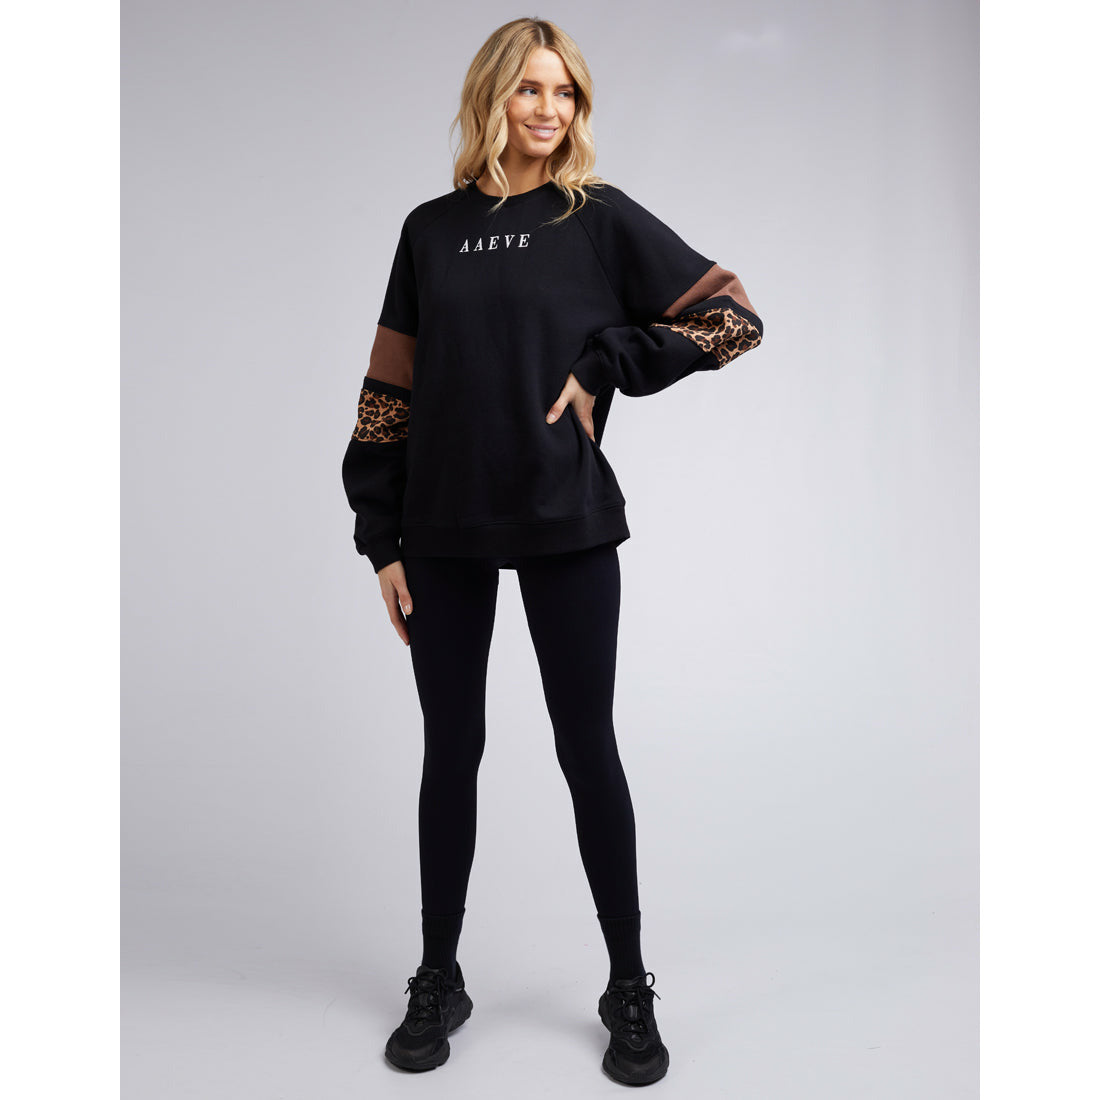 Huxley Sports Crew - Black | All About Eve All About Eve